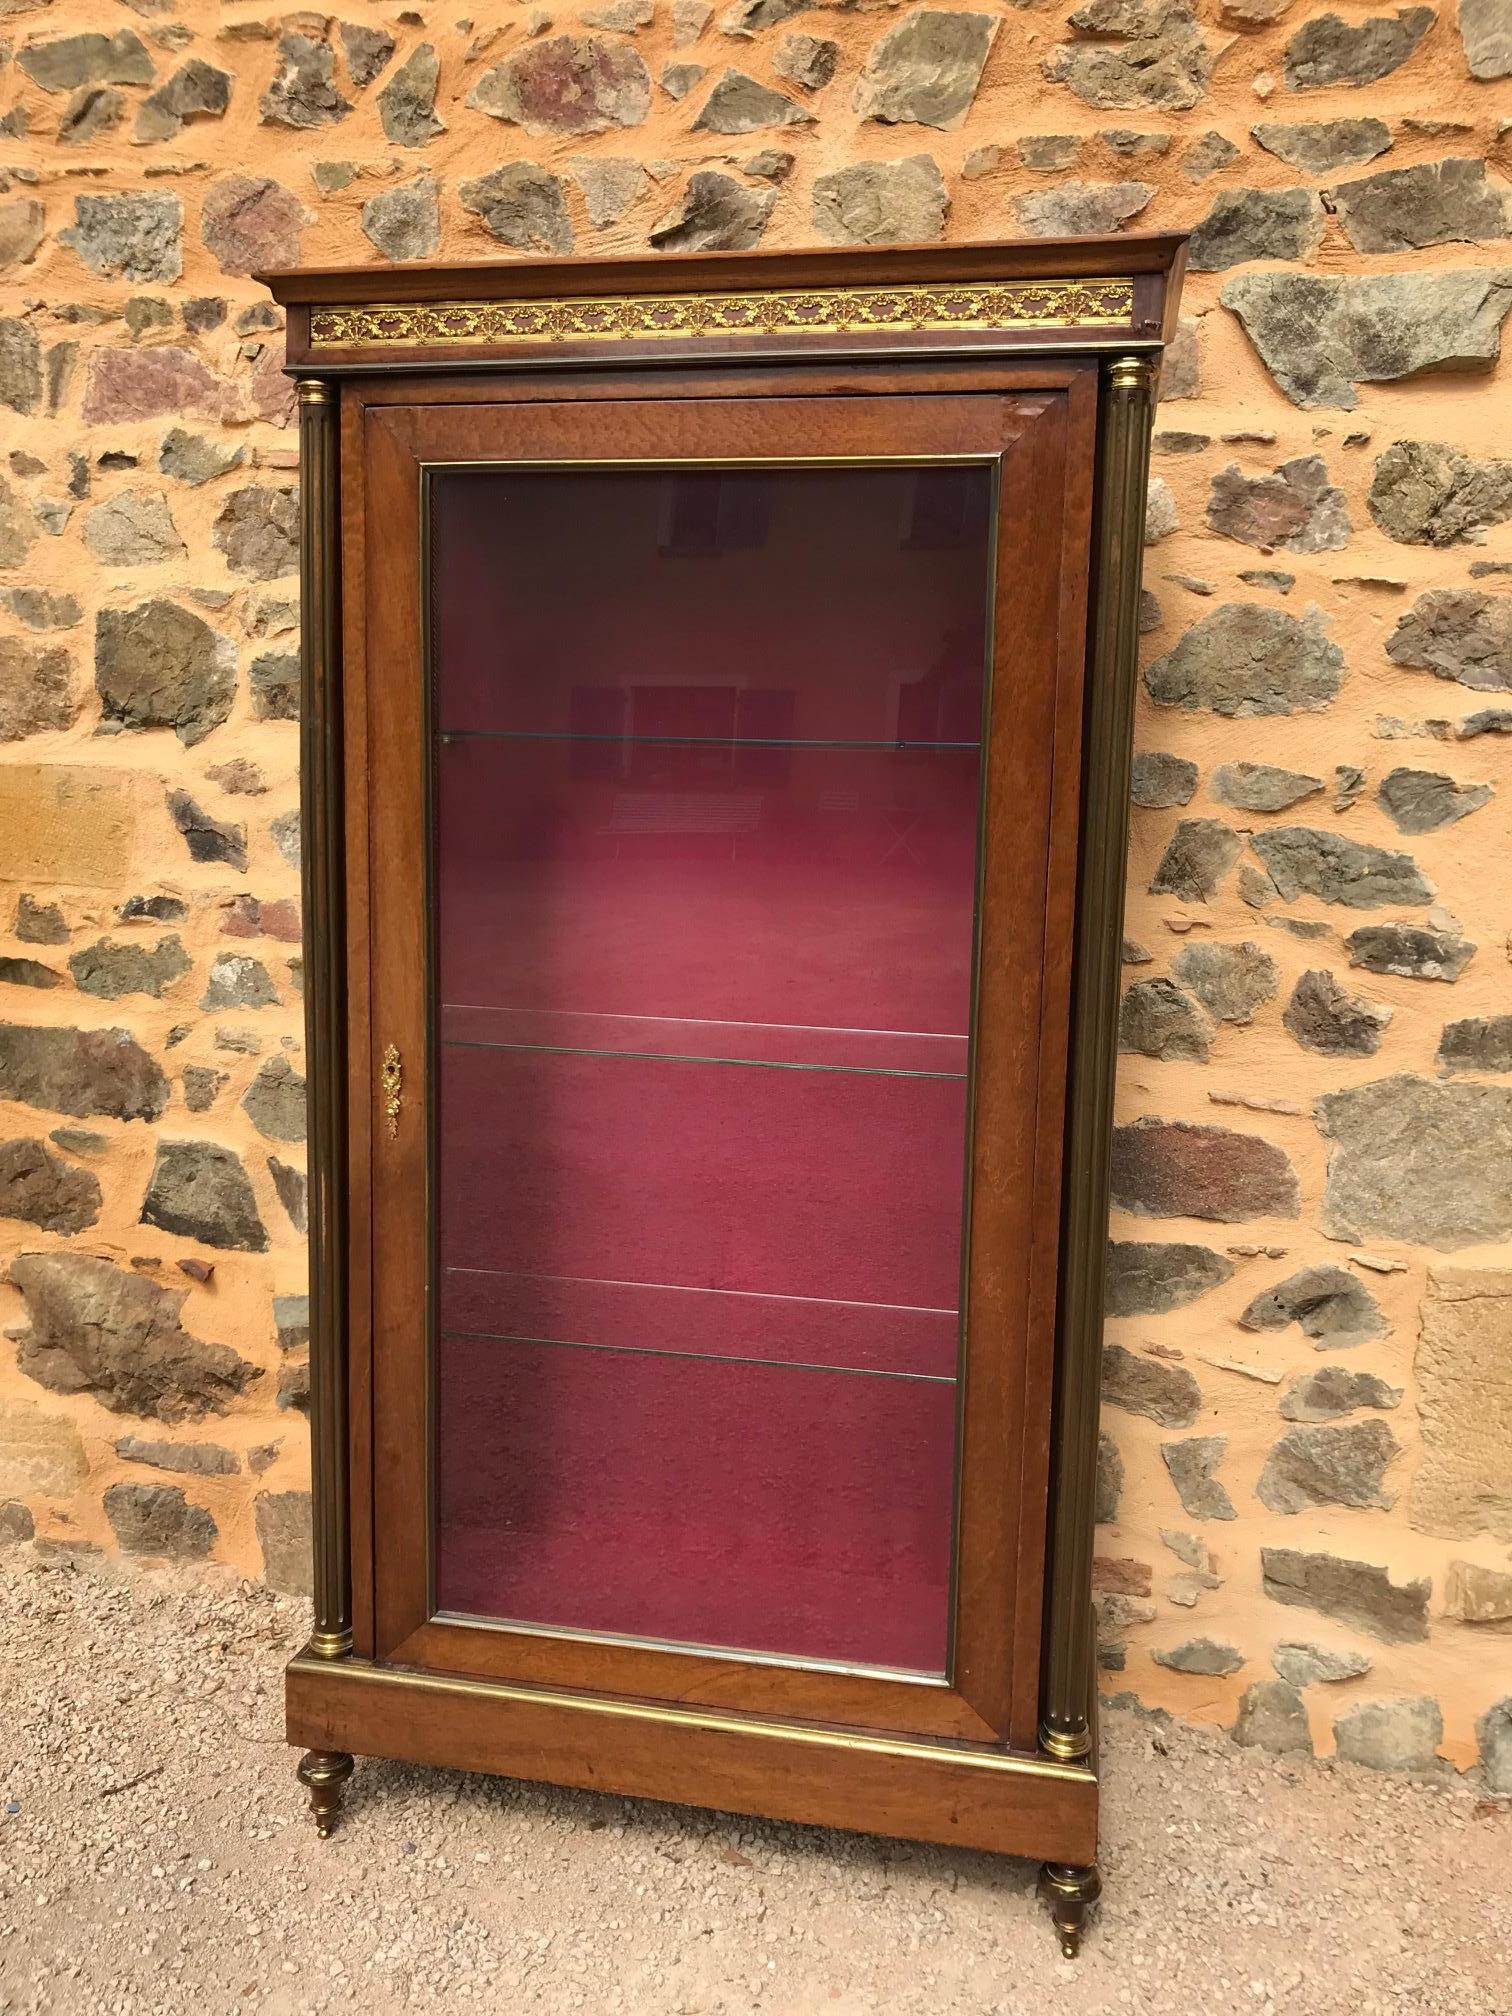 Early 20th century French mahogany and gilted brass directoire style vitrine.
Spindle feet, fluted columns with brass.
Three glass shelves and glass sides. Lining fabric was probably added later.
The crest is decorated with brass garland